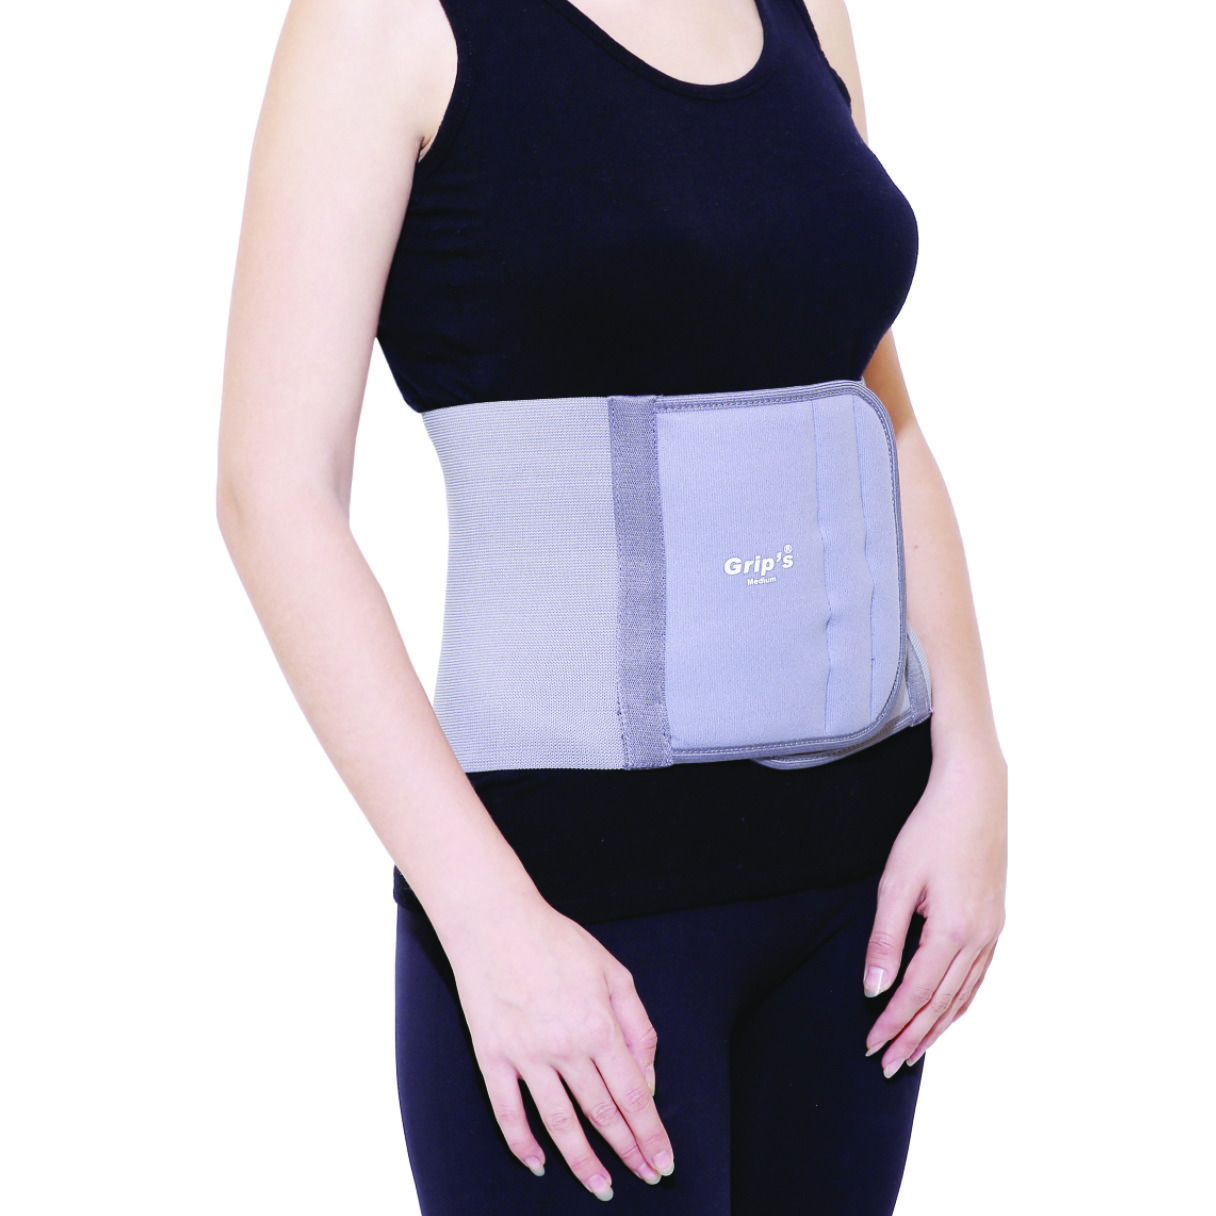 Pin on Abdominal Pain Relief  Binders, Braces & Treatments for Stomach &  Ab Muscle Injuries